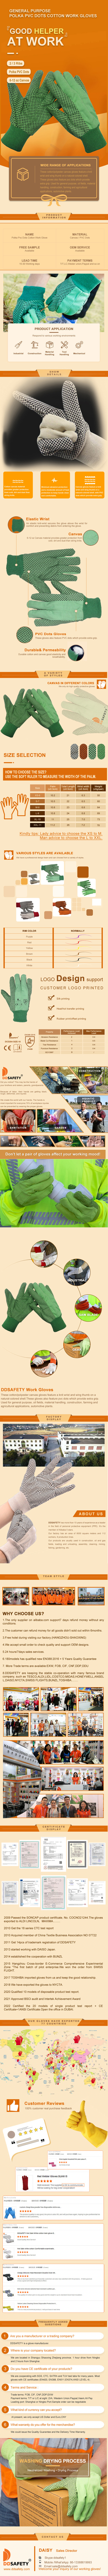 PVC Dotted Cotton Canvas Safety Work Gloves - DCD204 PVC Dotted Cotton Canvas Safety Work Gloves - DCD204 gloves,Dotted Canvas Gloves,work gloves,Canvas Work Gloves